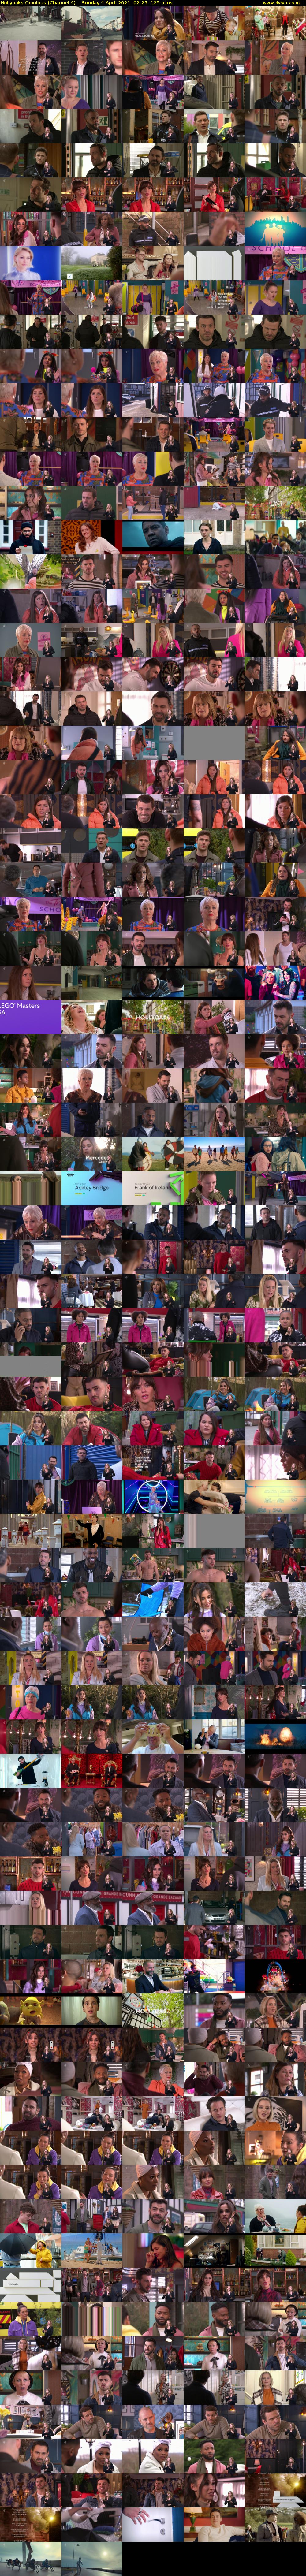 Hollyoaks Omnibus (Channel 4) Sunday 4 April 2021 02:25 - 04:30